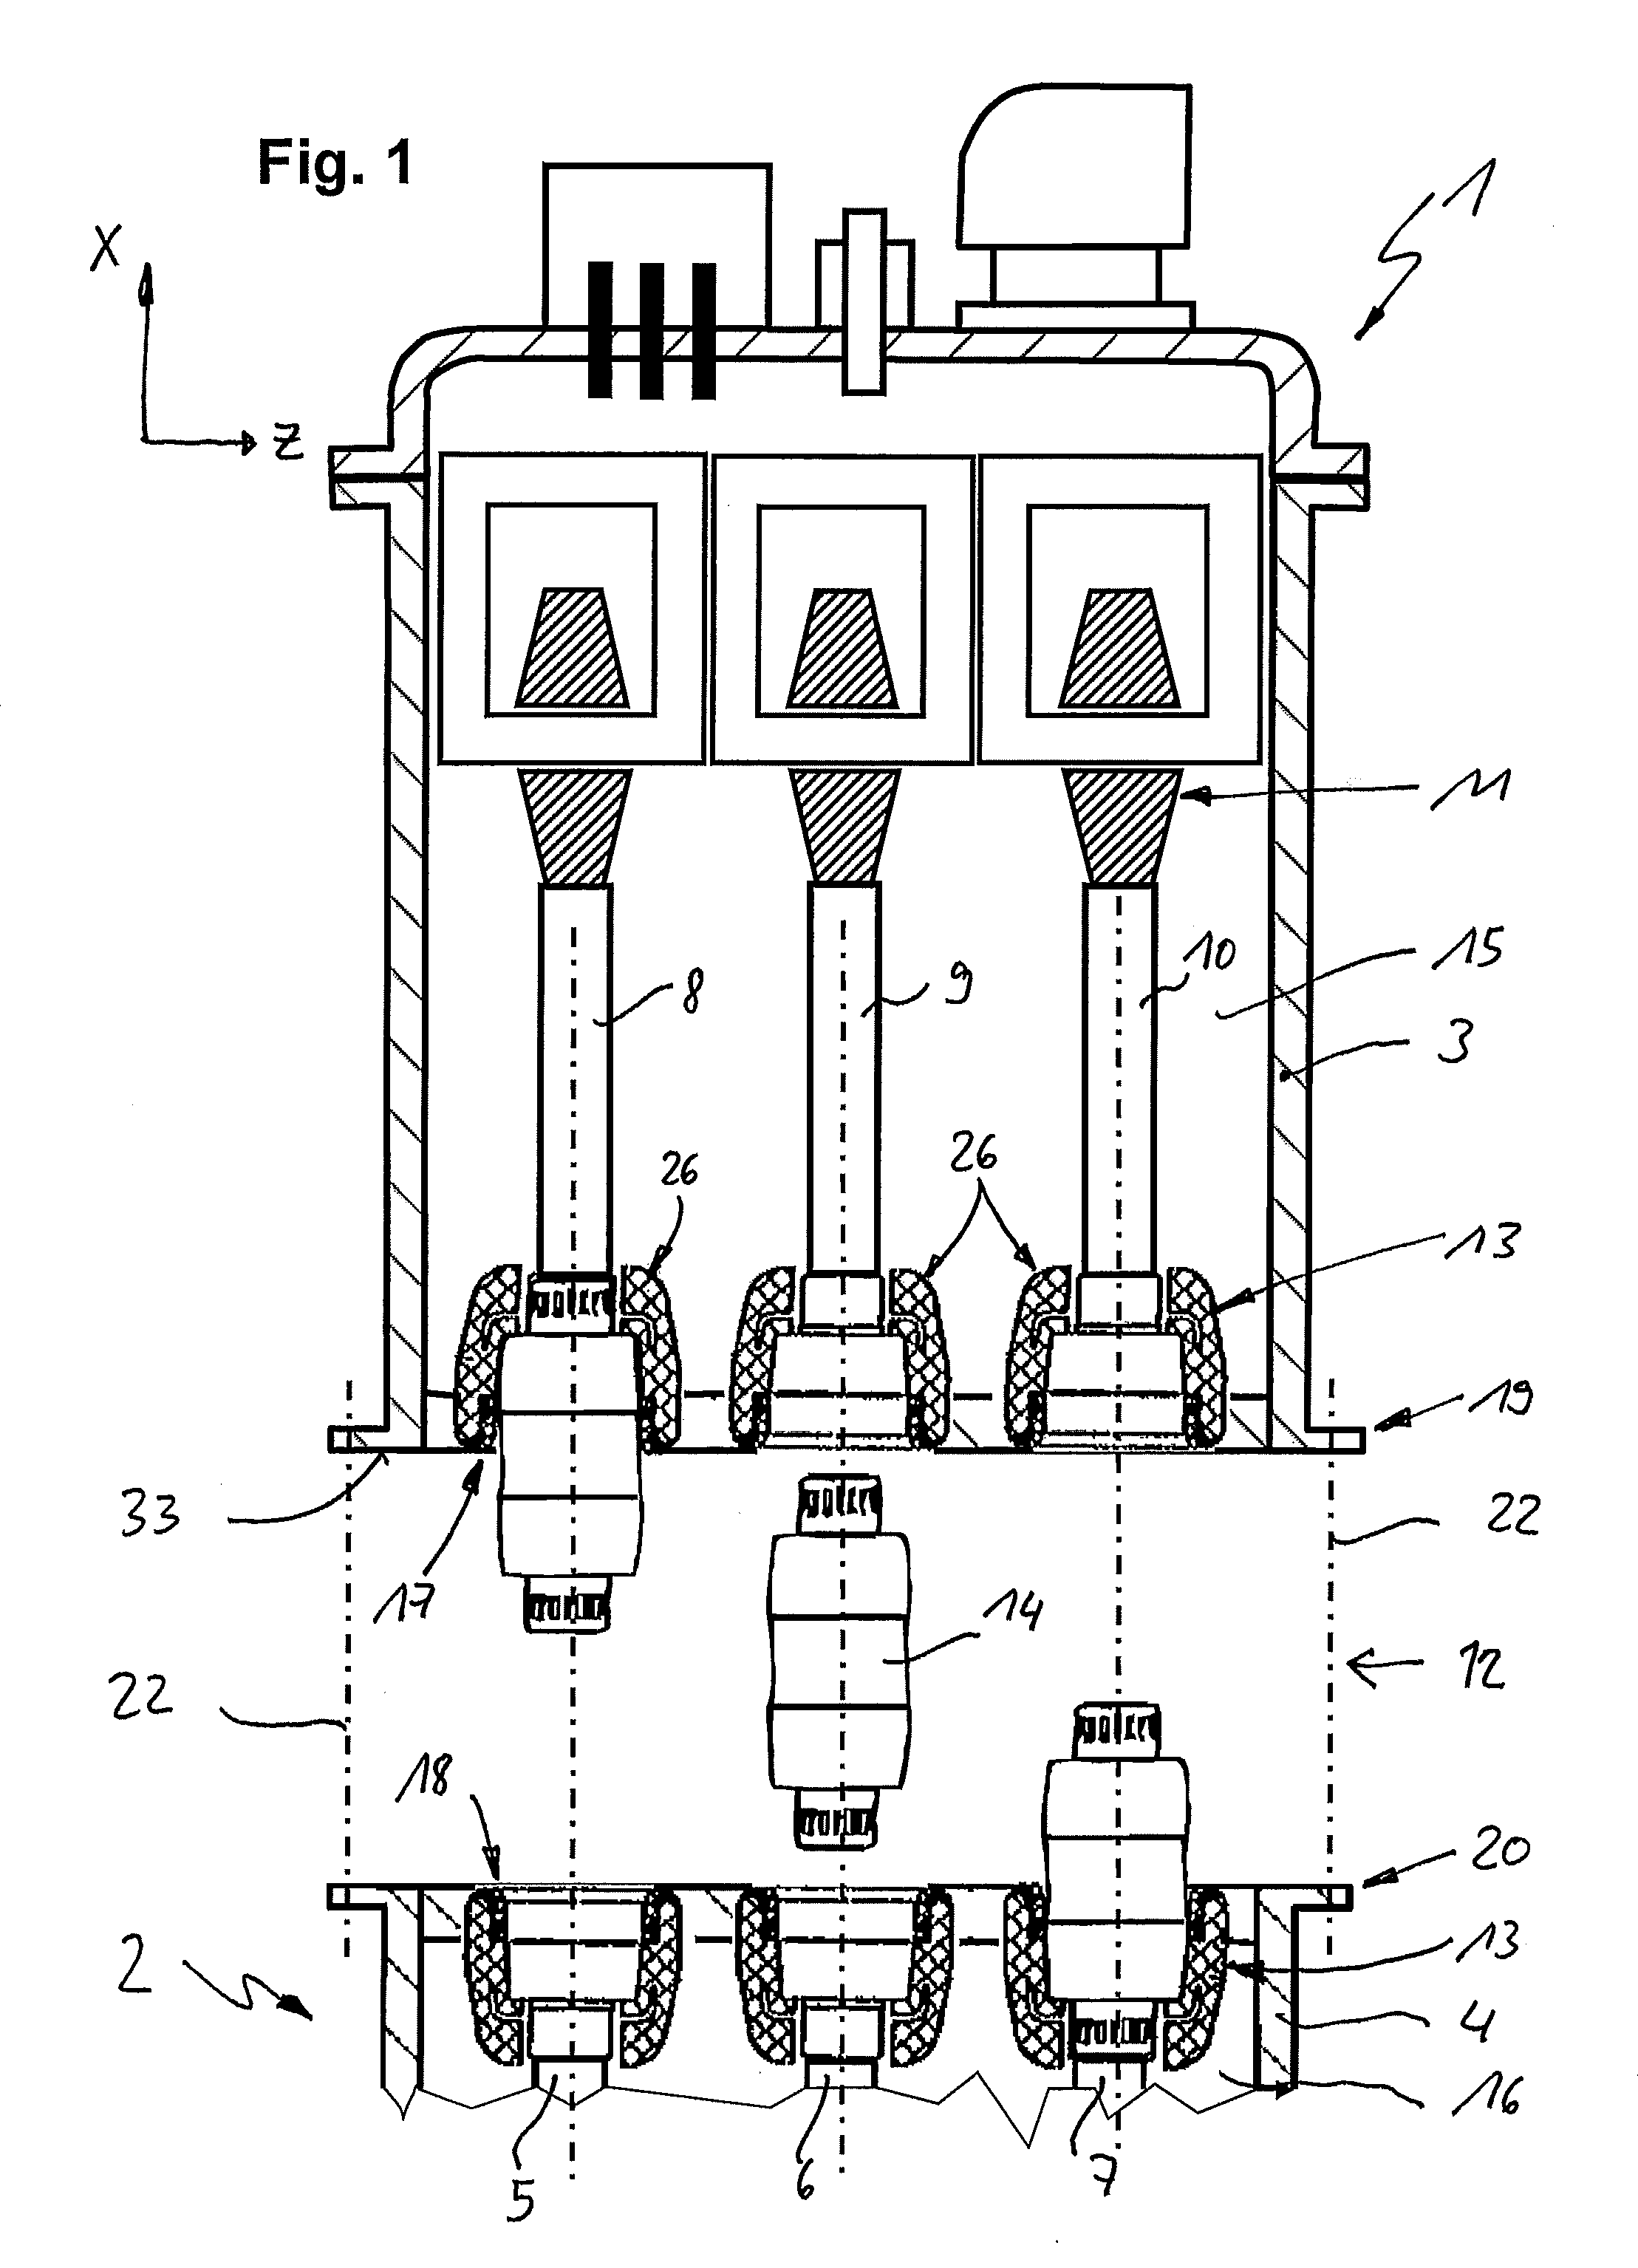 Plug-in primary power connections of two modules of a gas-insulated high-voltage switchgear assembly